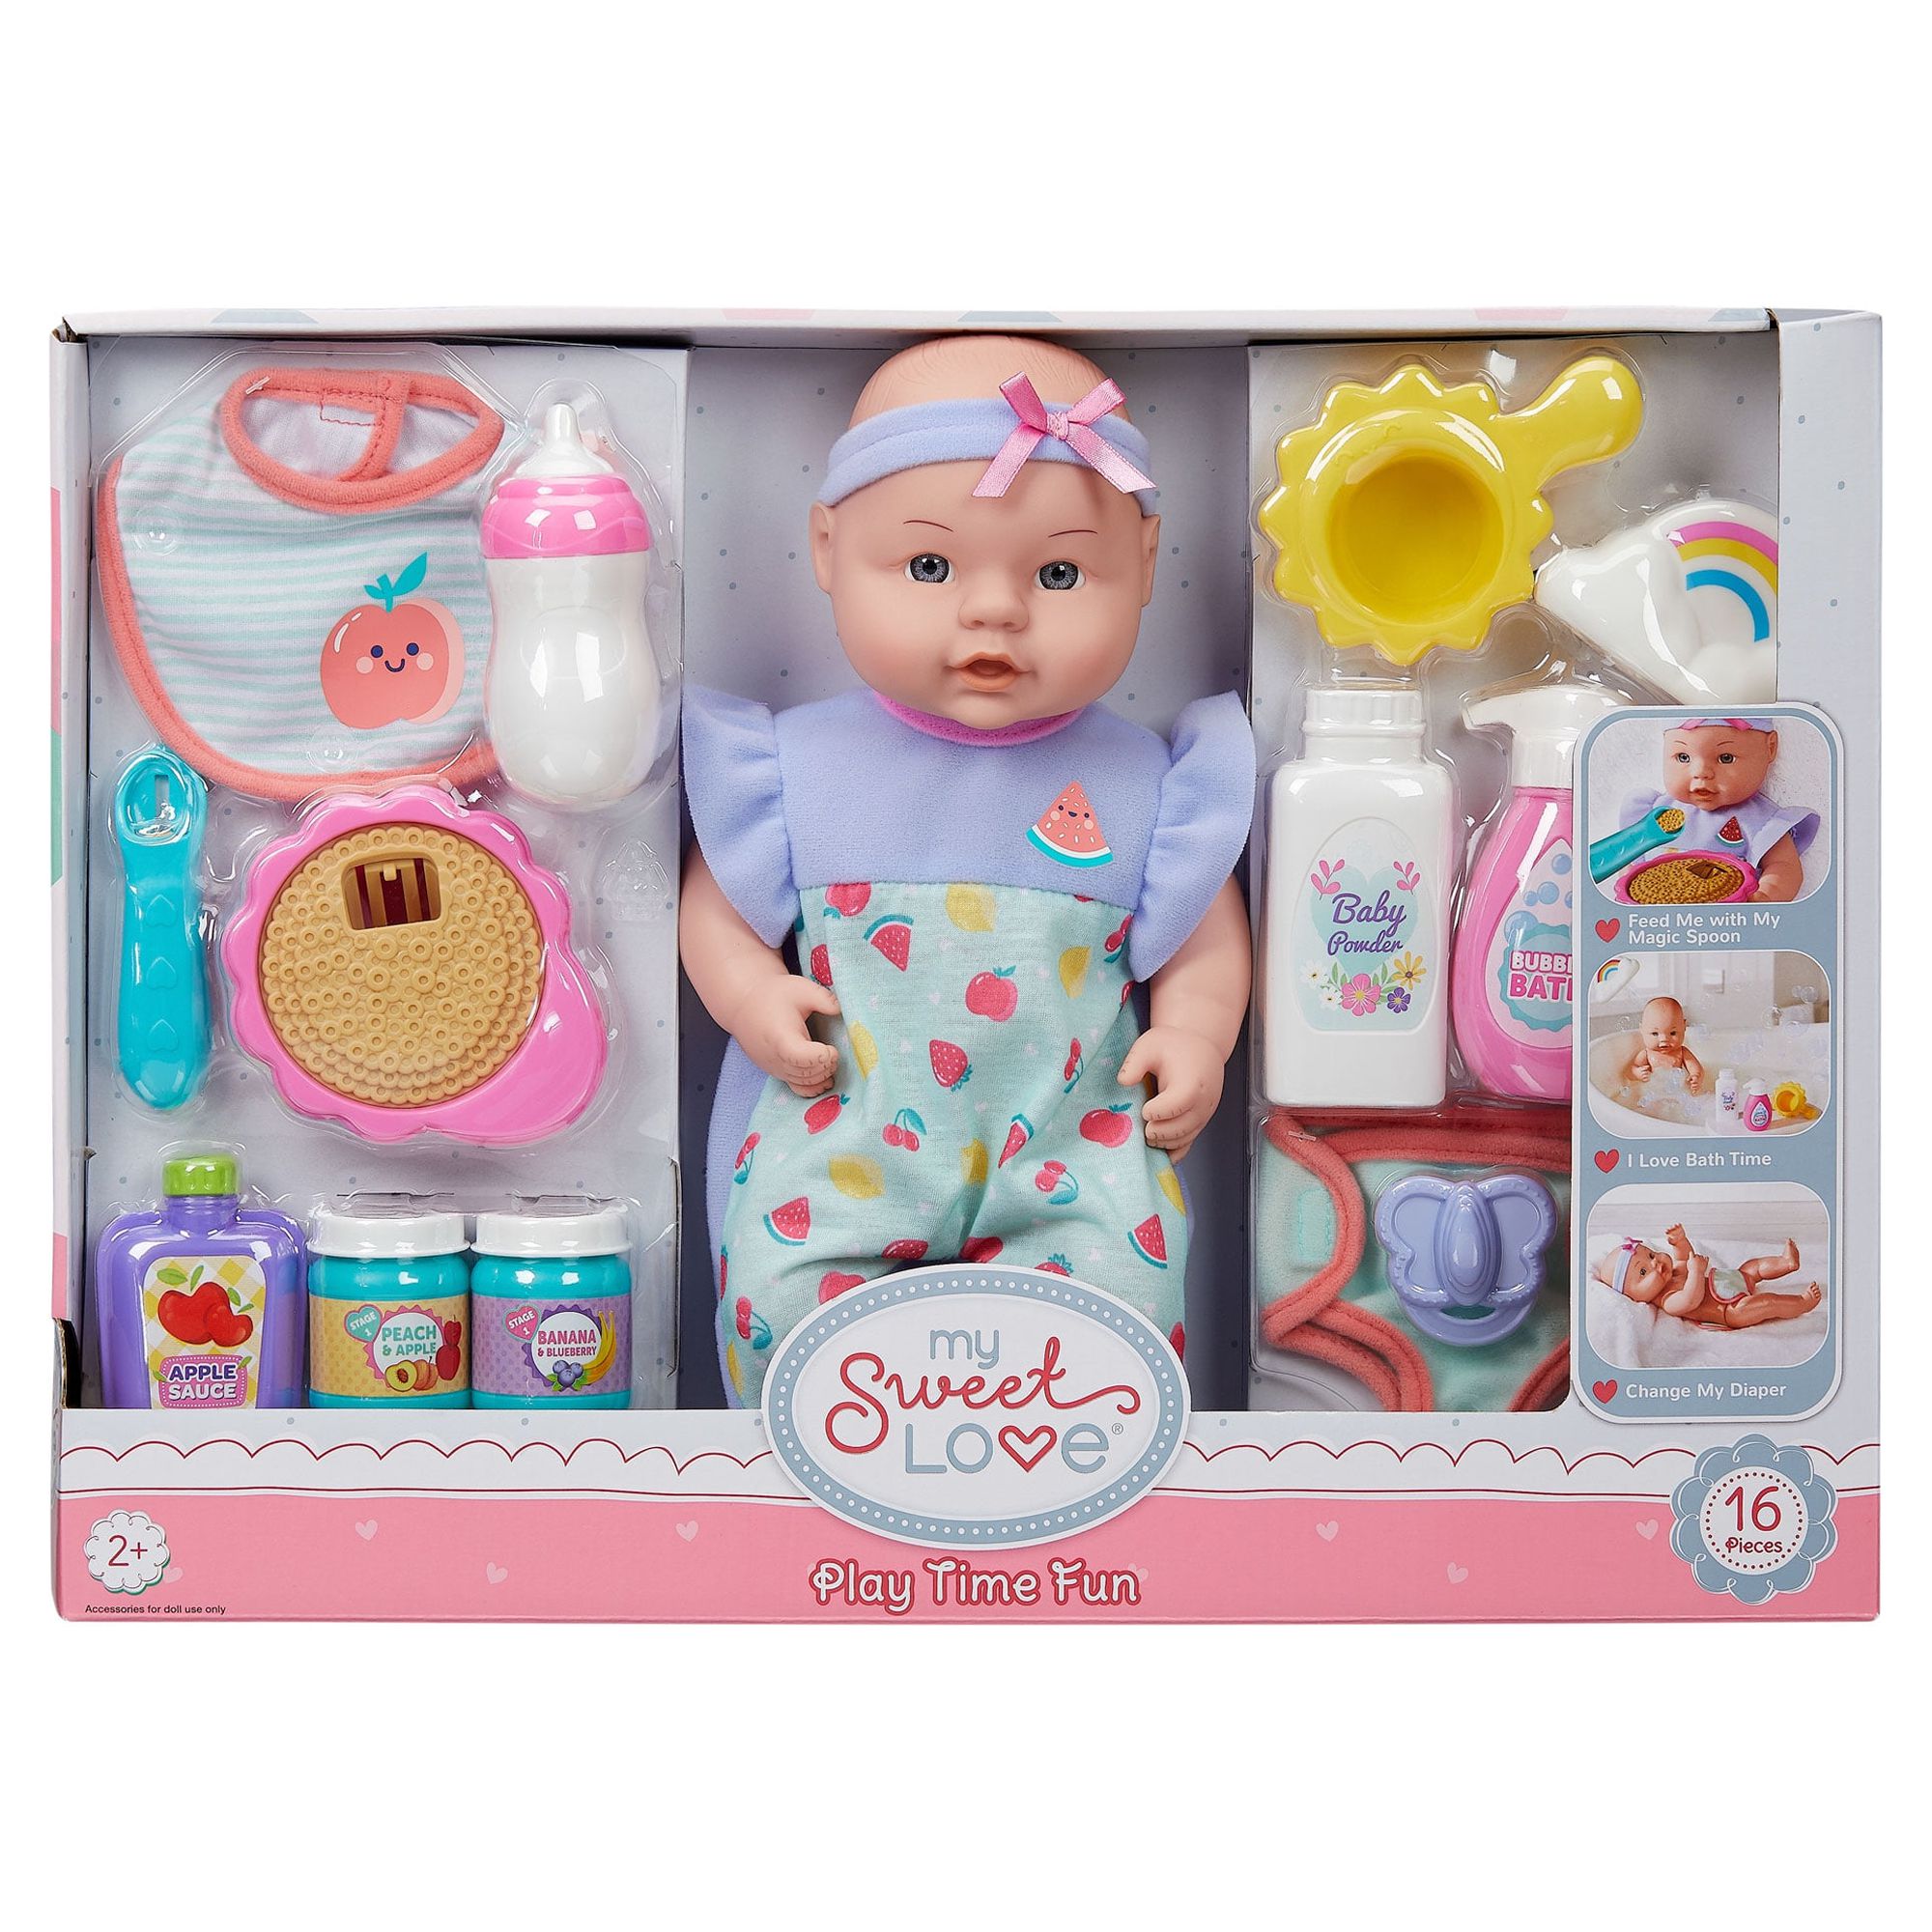 My Sweet Love 12.5" Play with Me Play Set, 16 Pieces Included - image 5 of 5